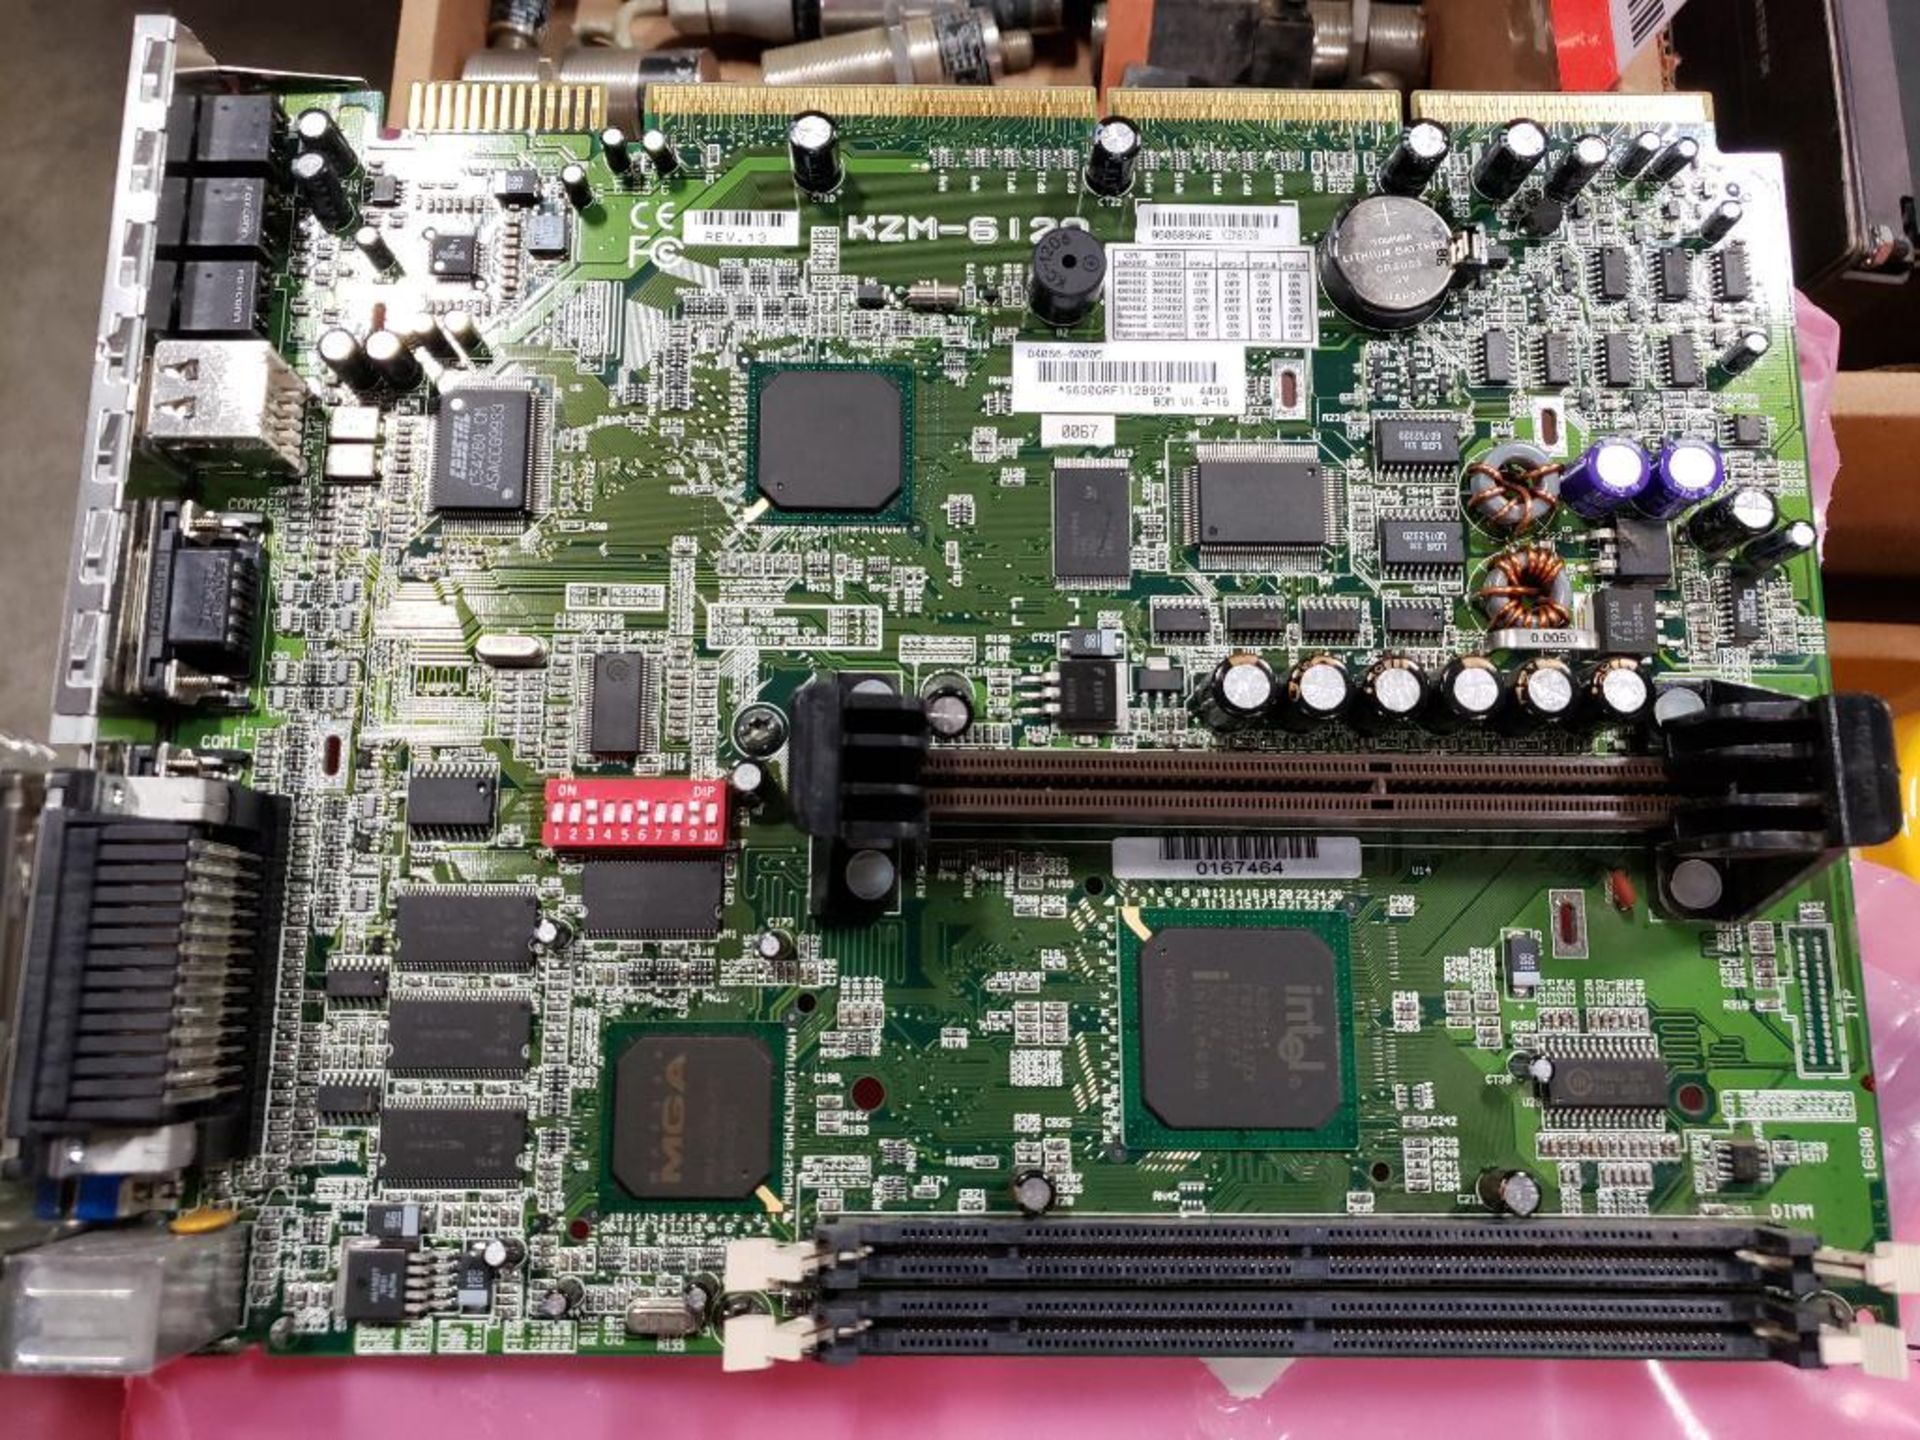 Qty 3 - HP KZM-6120 mother board card. D4066-60005. - Image 5 of 7